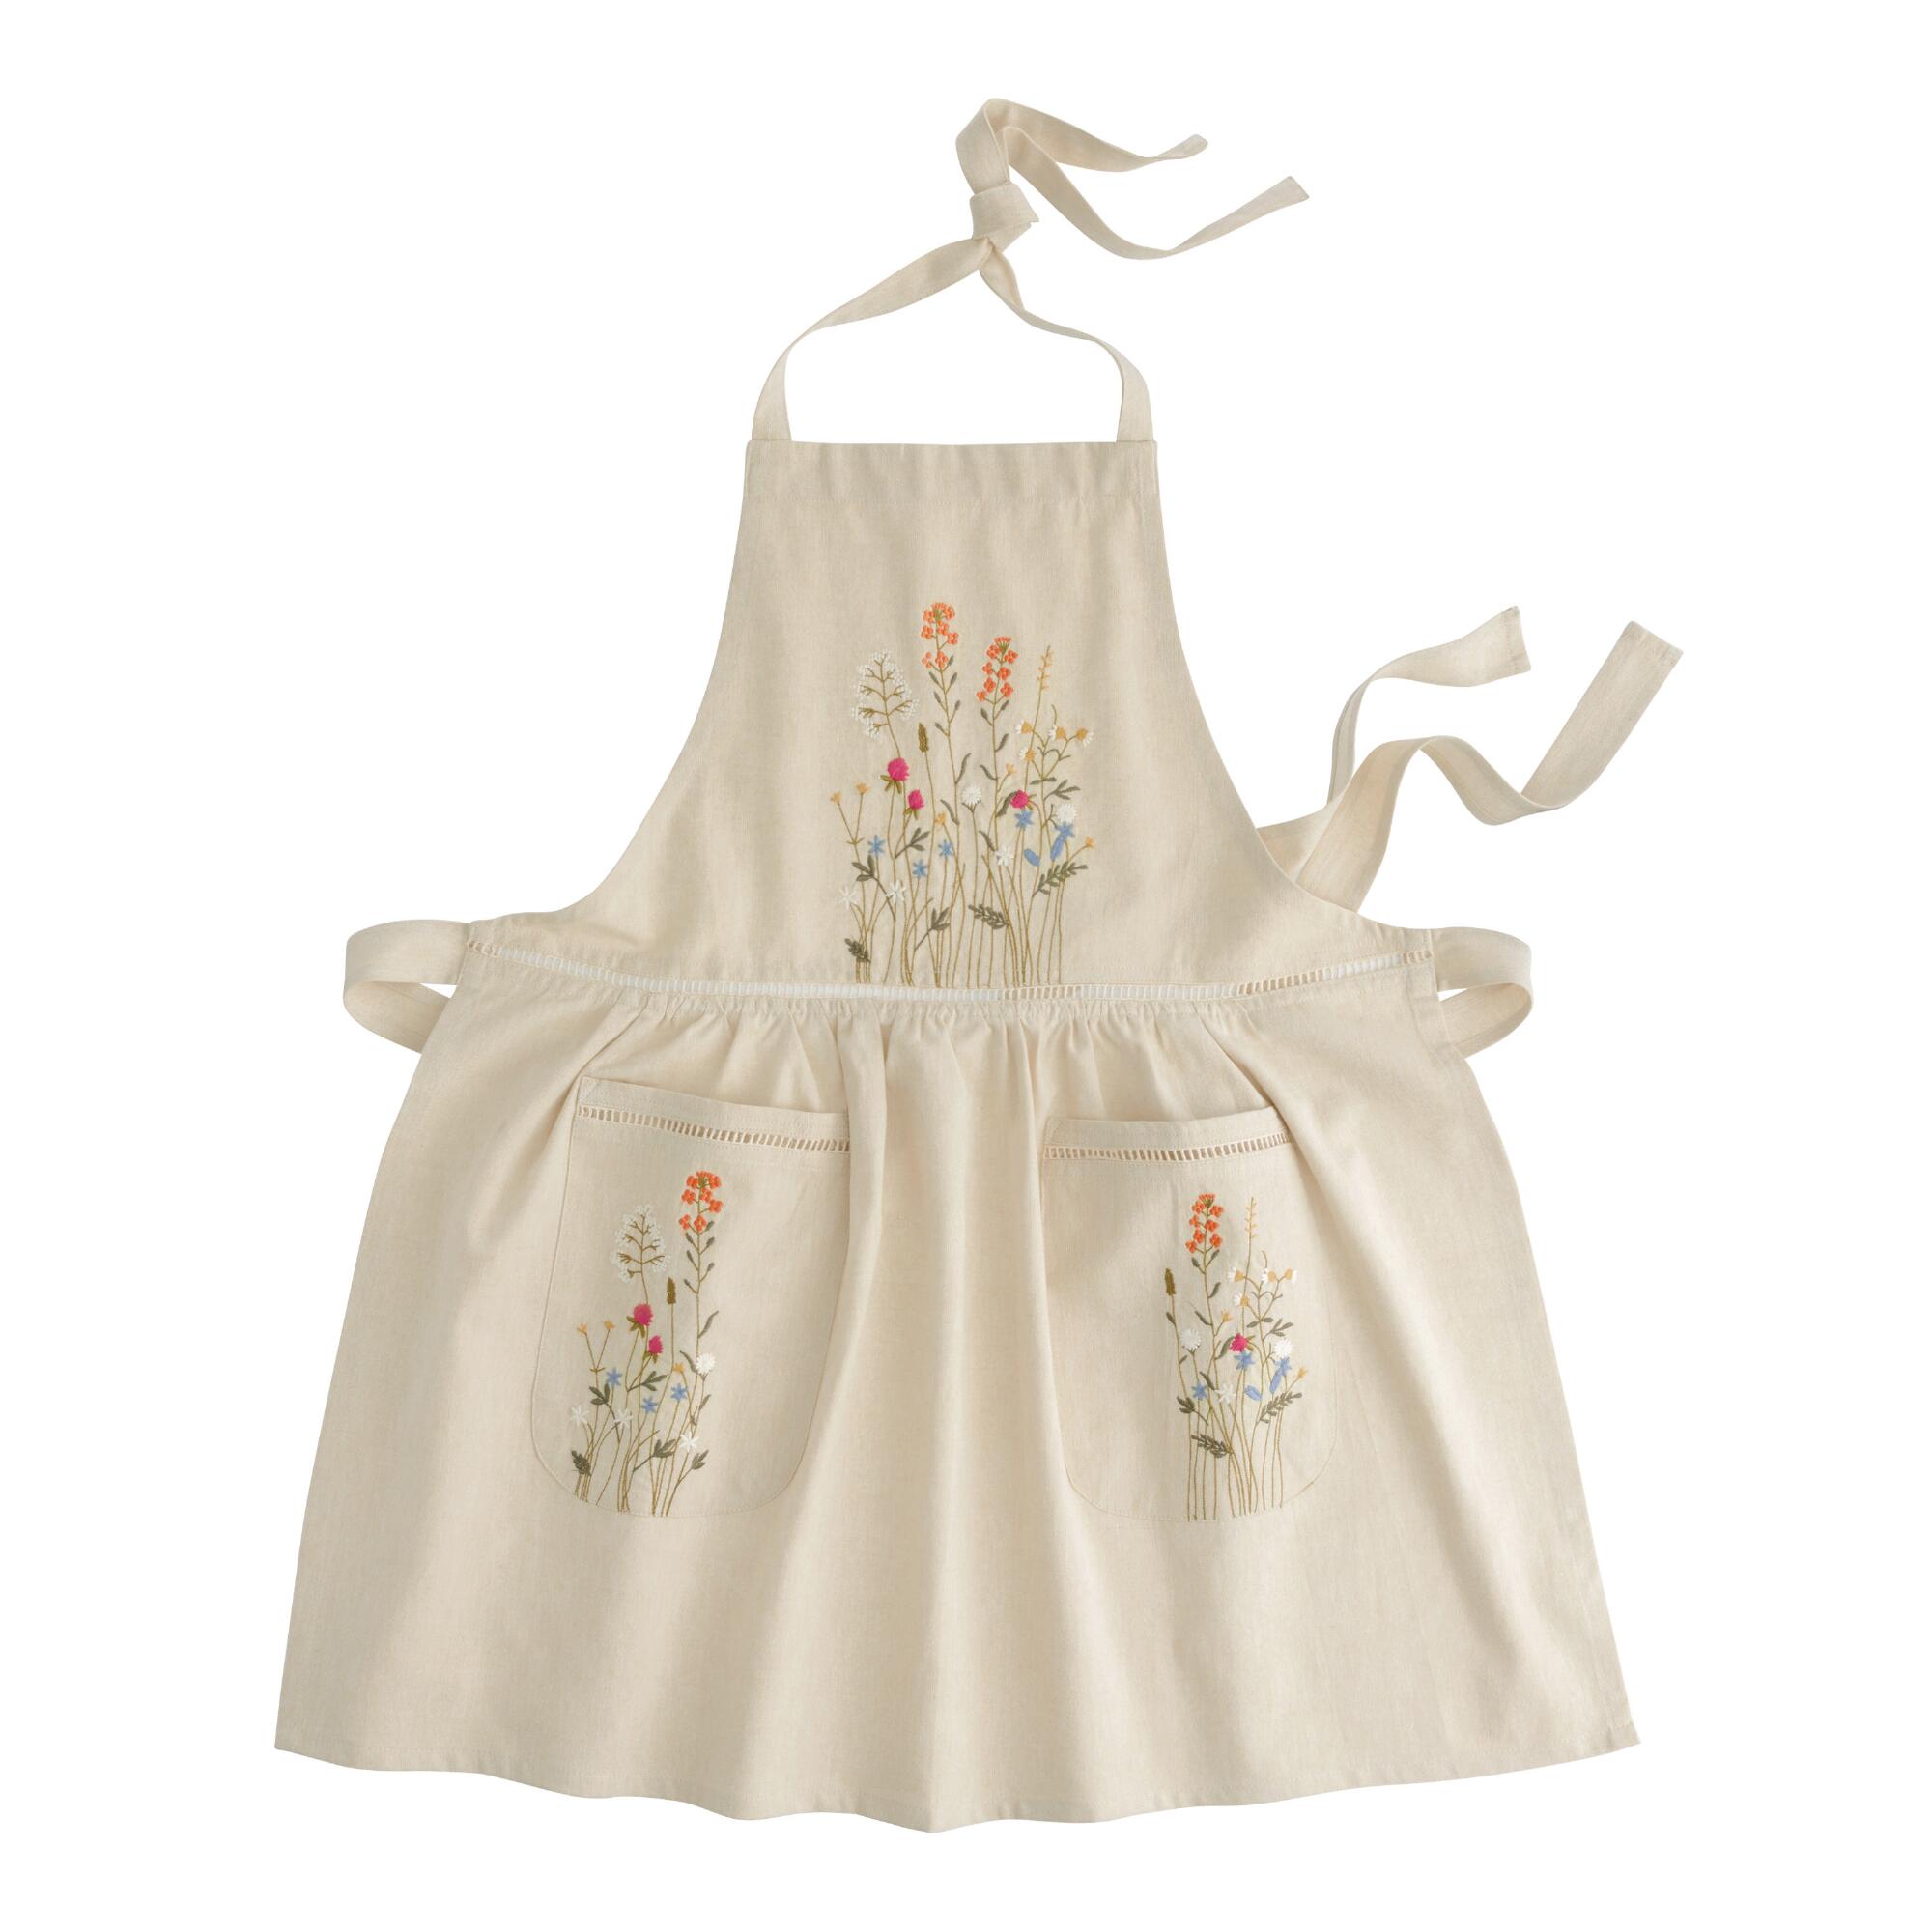 Natural Embroidered Floral Apron with Lace Trim by World Market